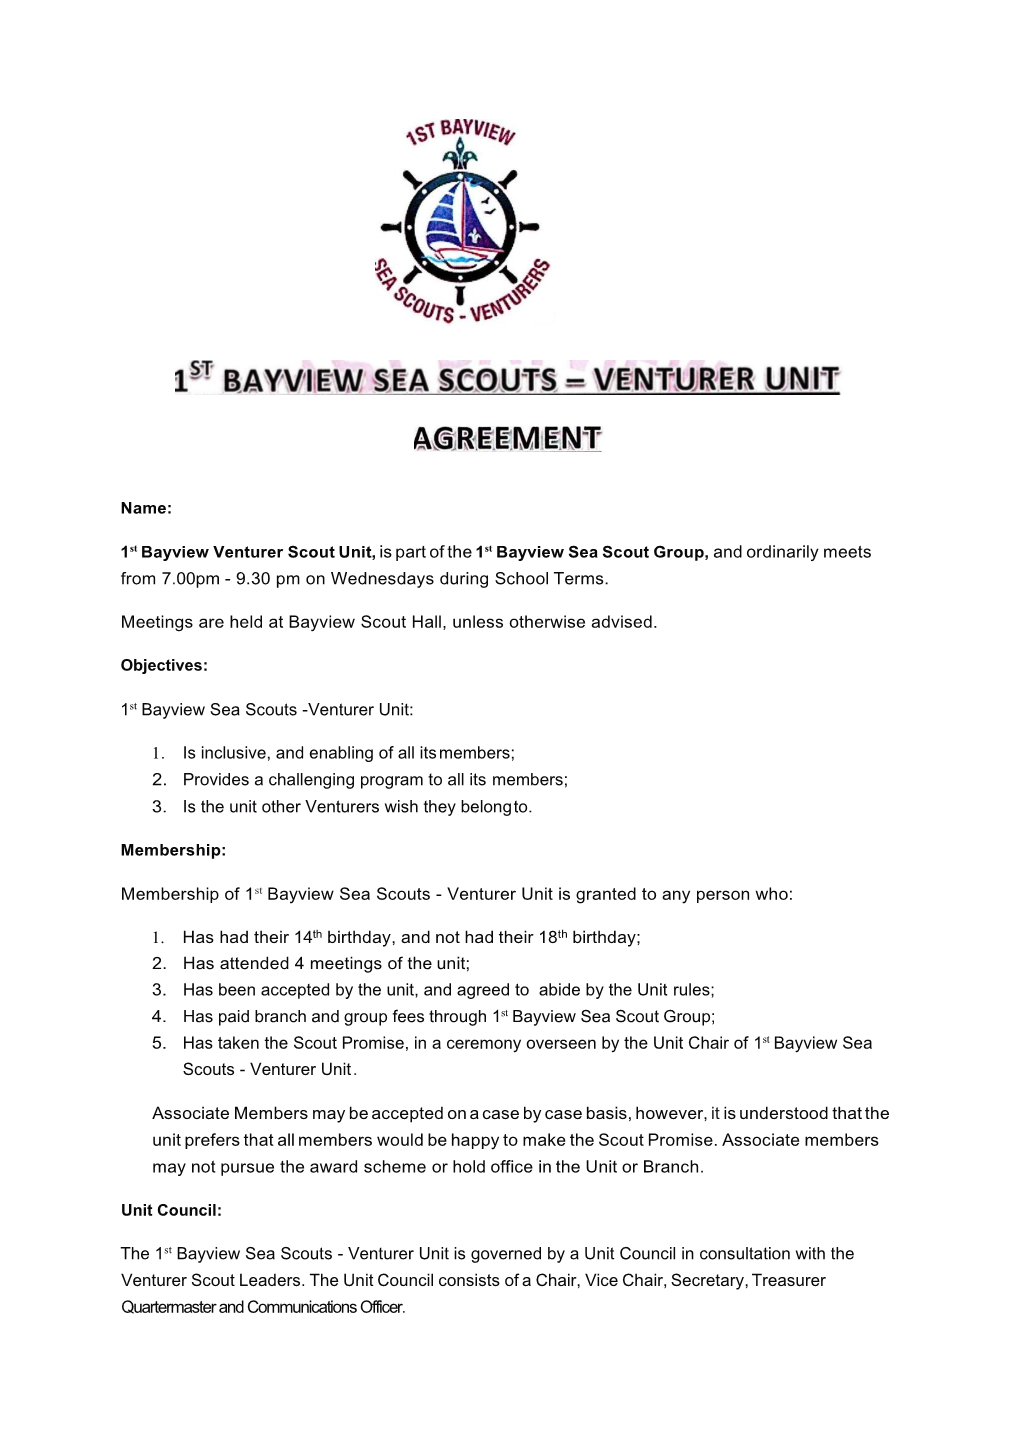 Name: 1St Bayview Venturer Scout Unit, Is Part of the 1St Bayview Sea